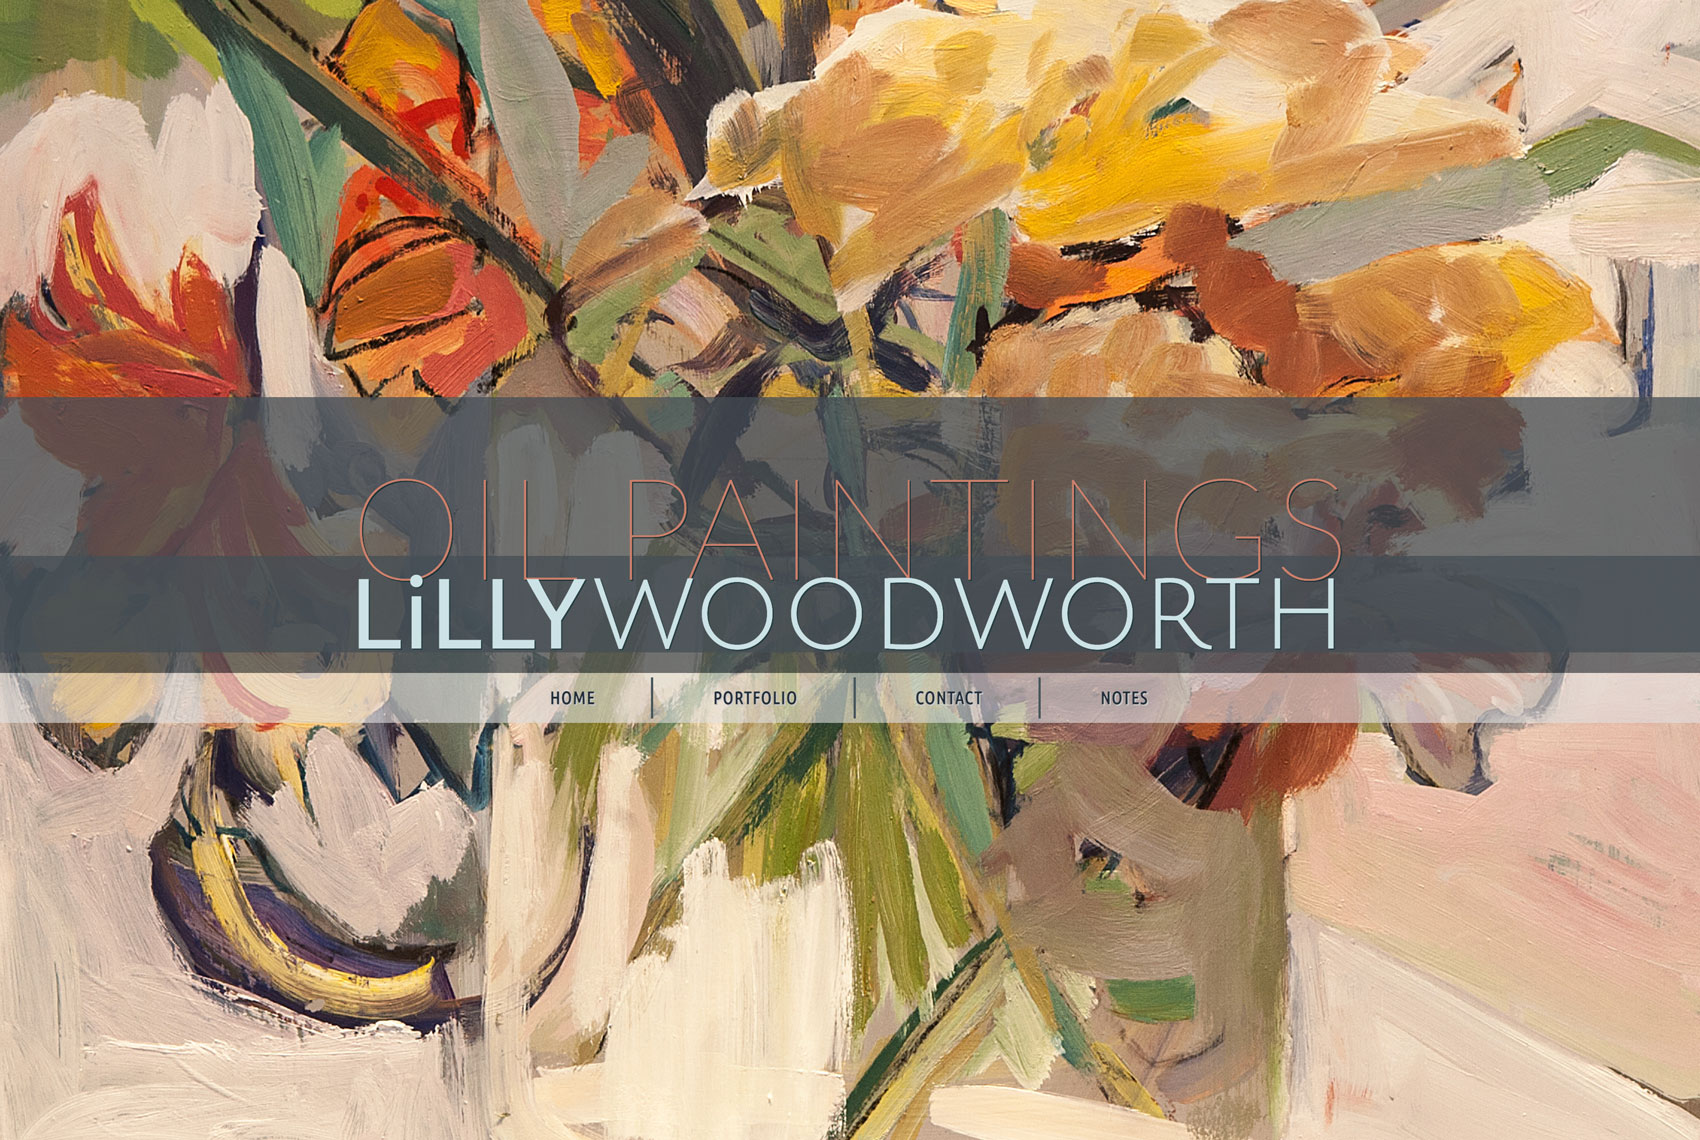 Lilly Woodworth